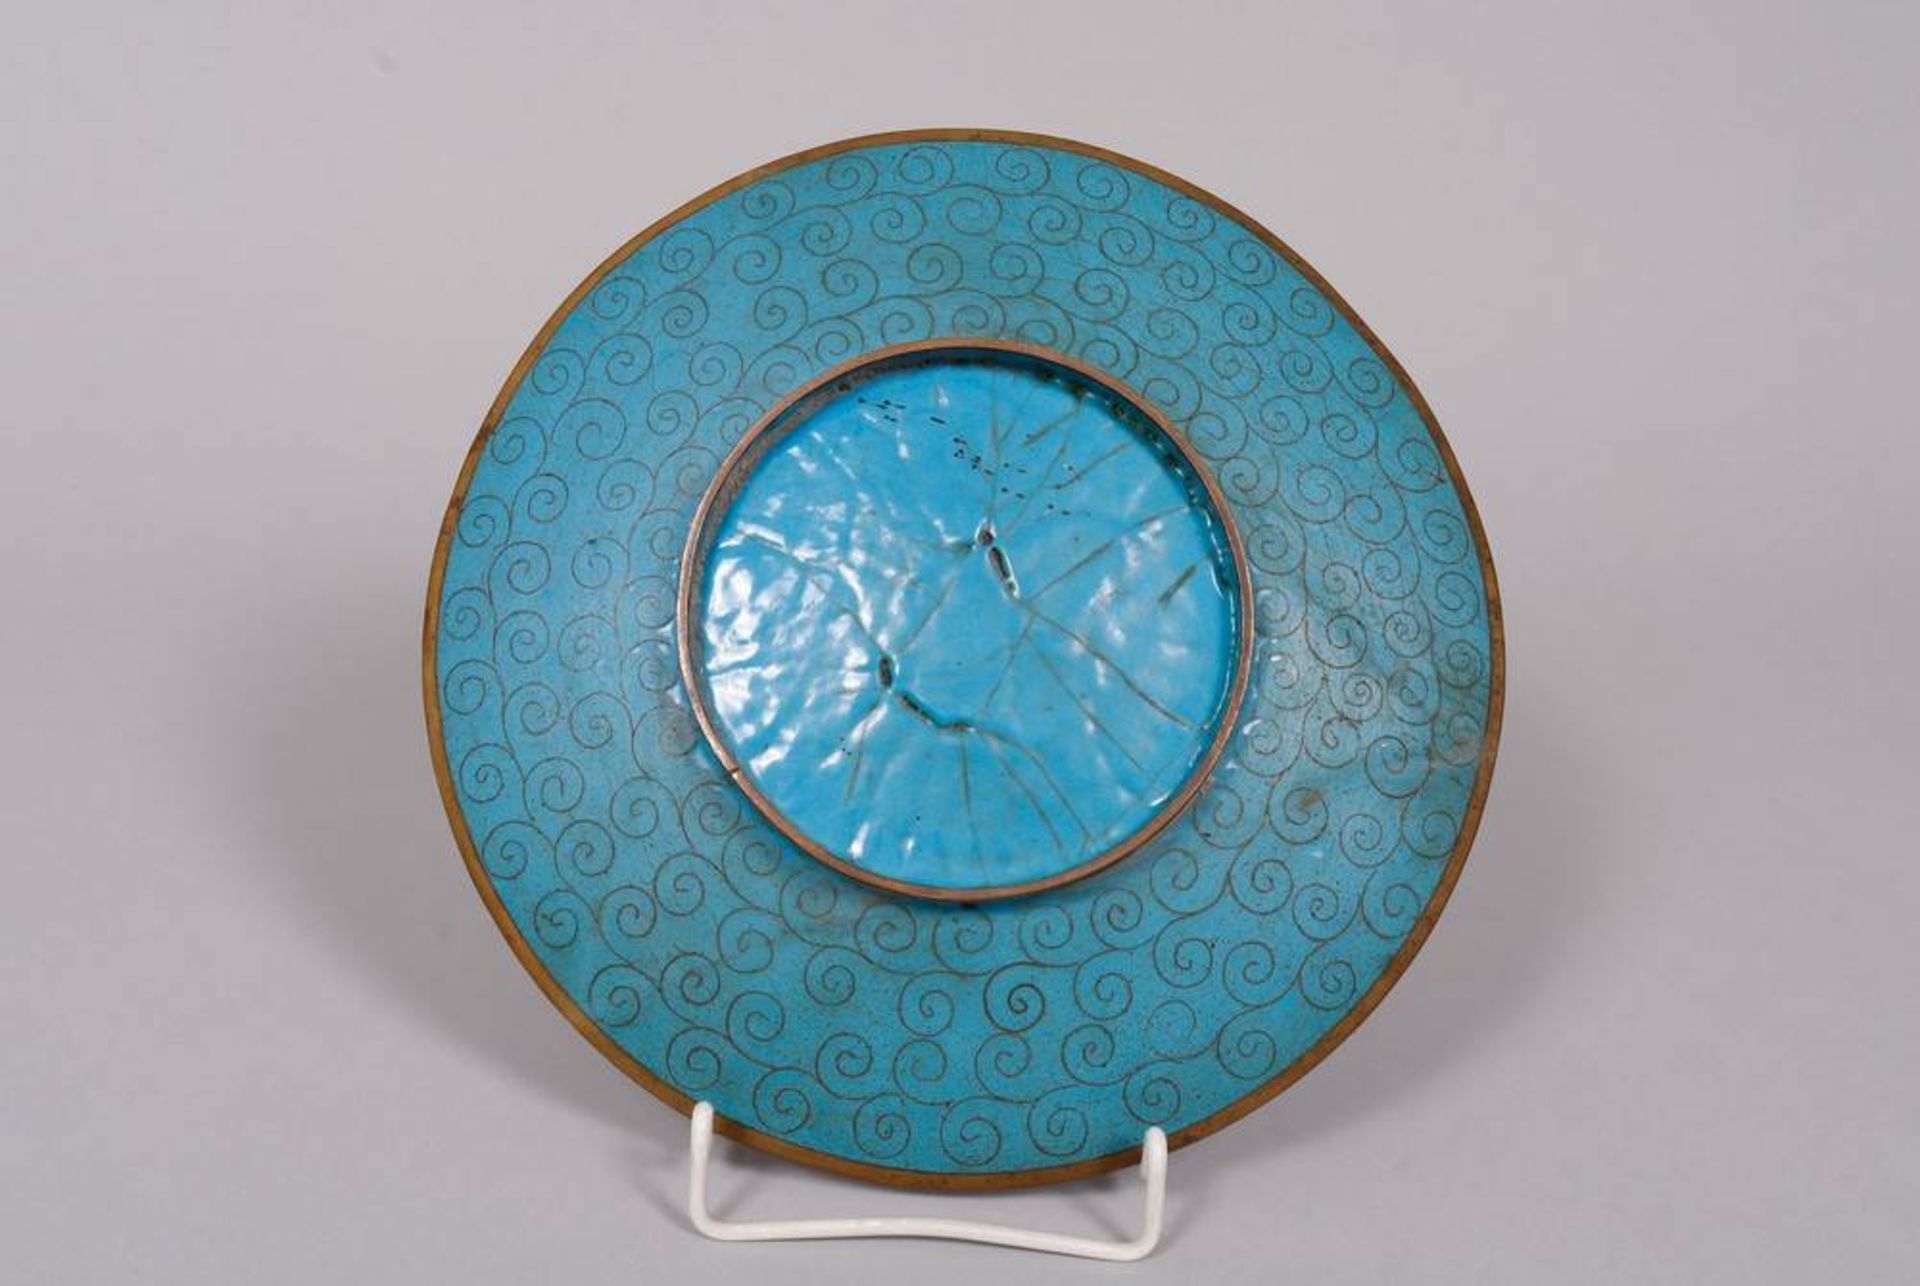 Cloisonné plate, China, early 20th C. - Image 3 of 3